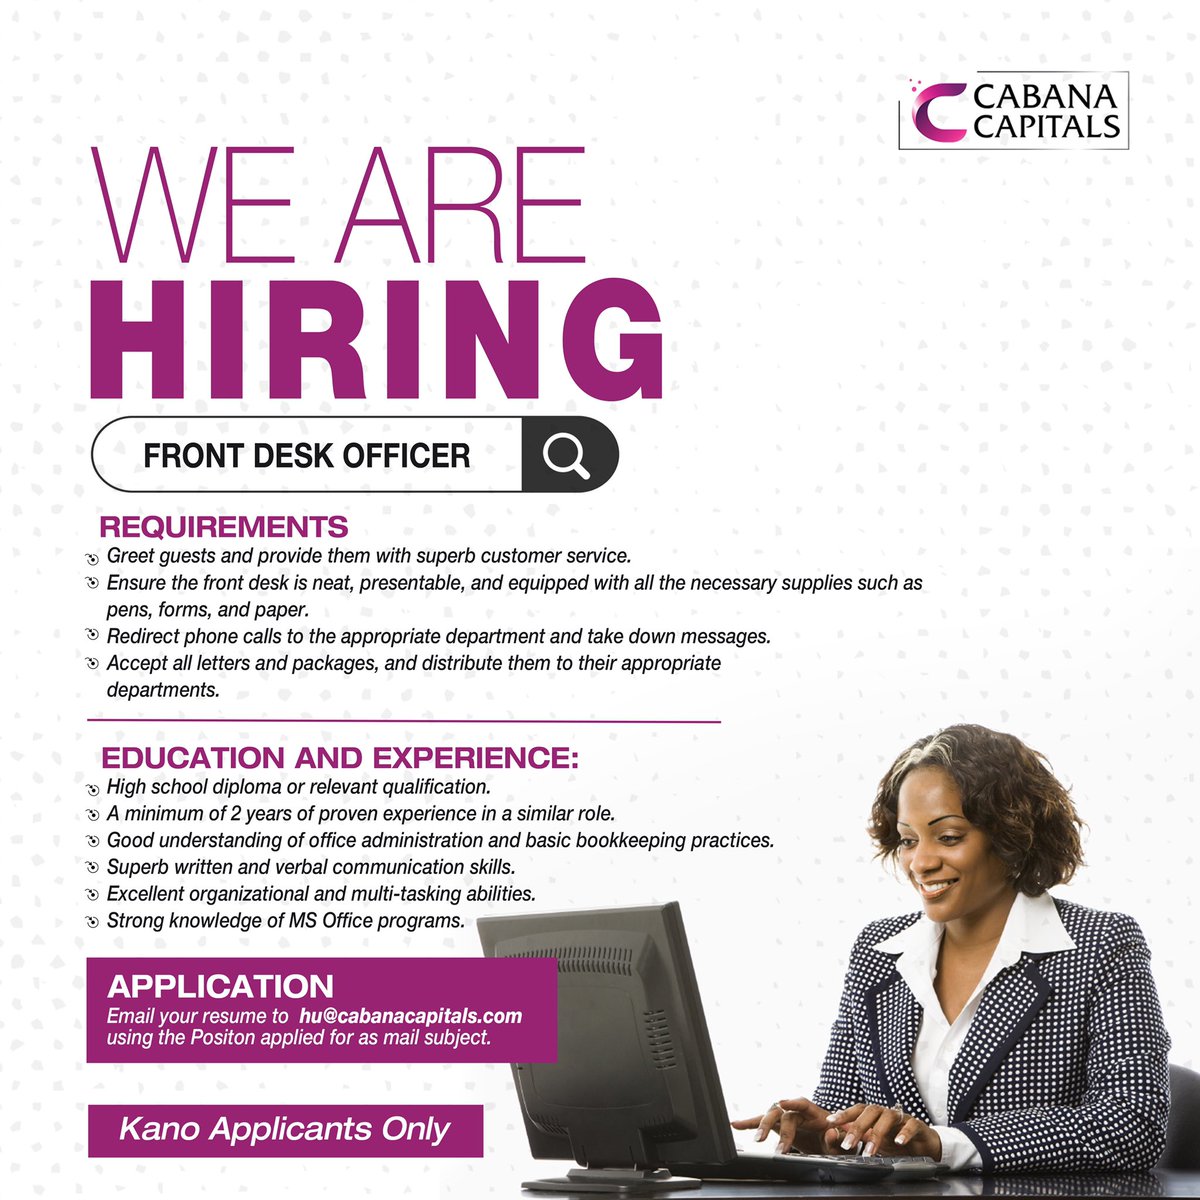 We are Hiring for our Kano Office! 

Qualified candidates should send resumes to hu@cabanacapitals.com

#hiring #frontdeskofficer #kano